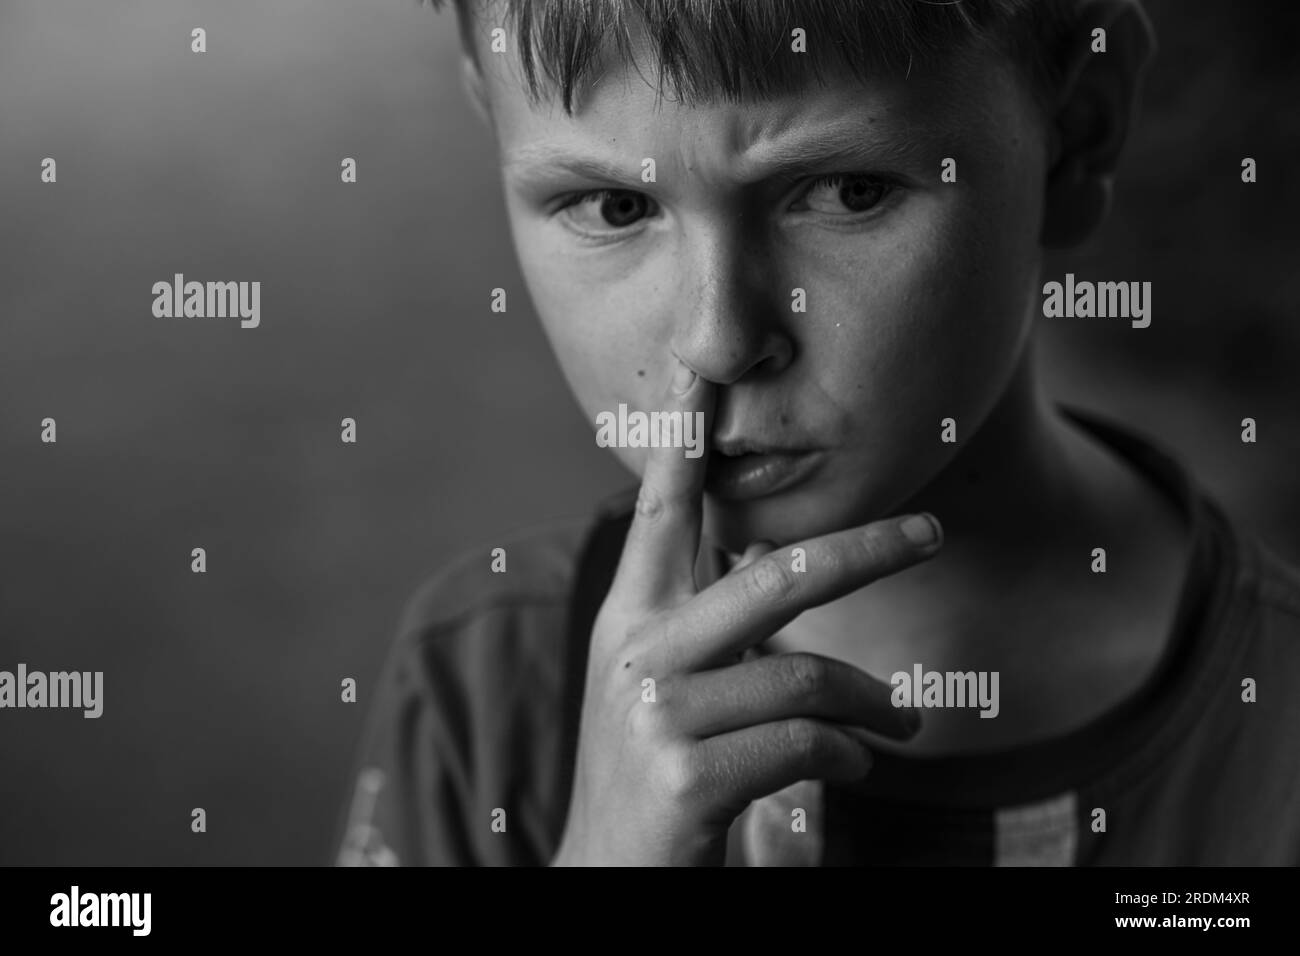 Portrait of a boy picking his nose. Thoughtful boy furrows his brows. Black and white image. Stock Photo